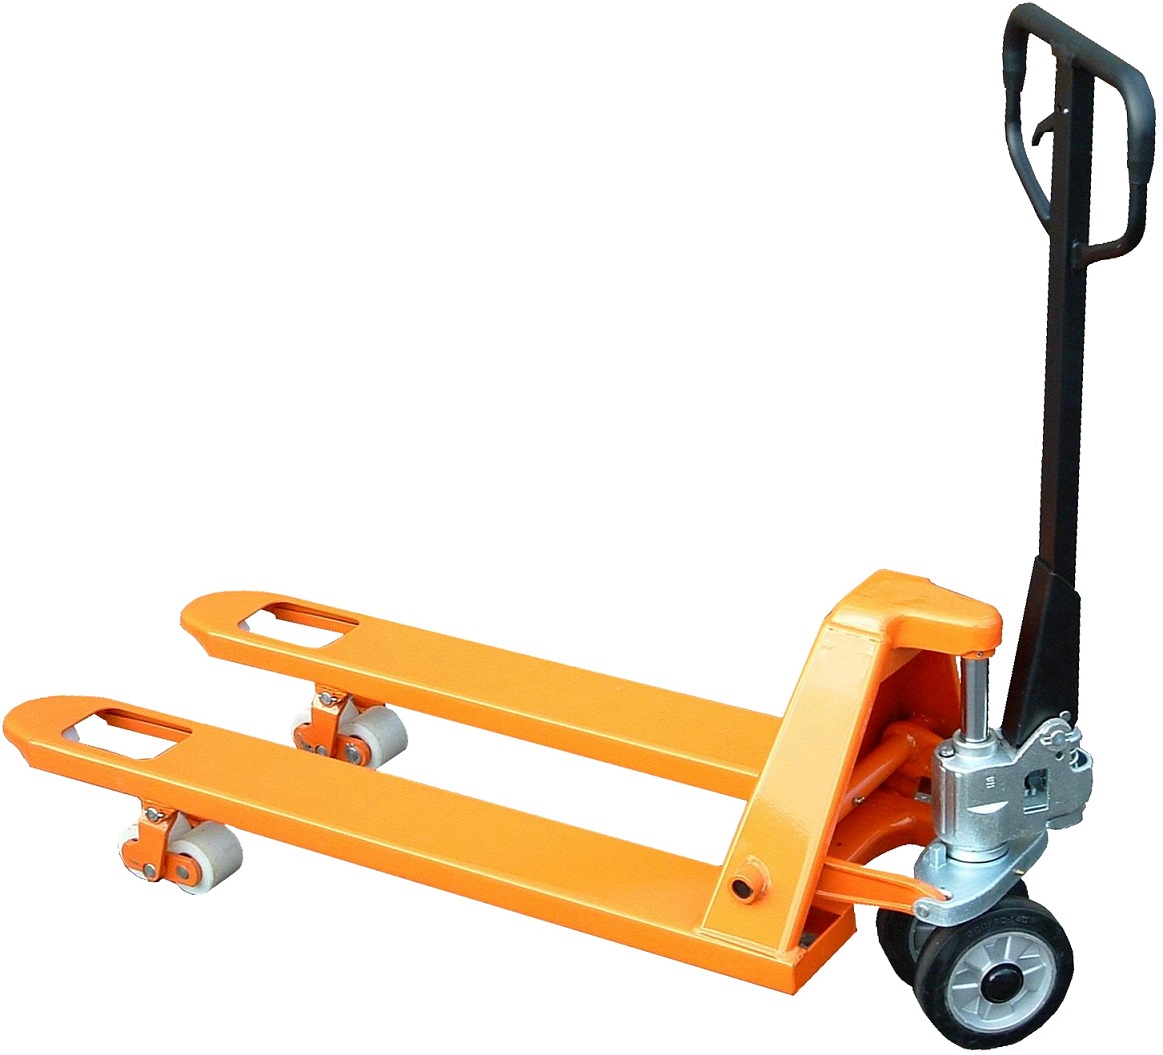 High Quality Hand Pallet Trucks made in China.jpg